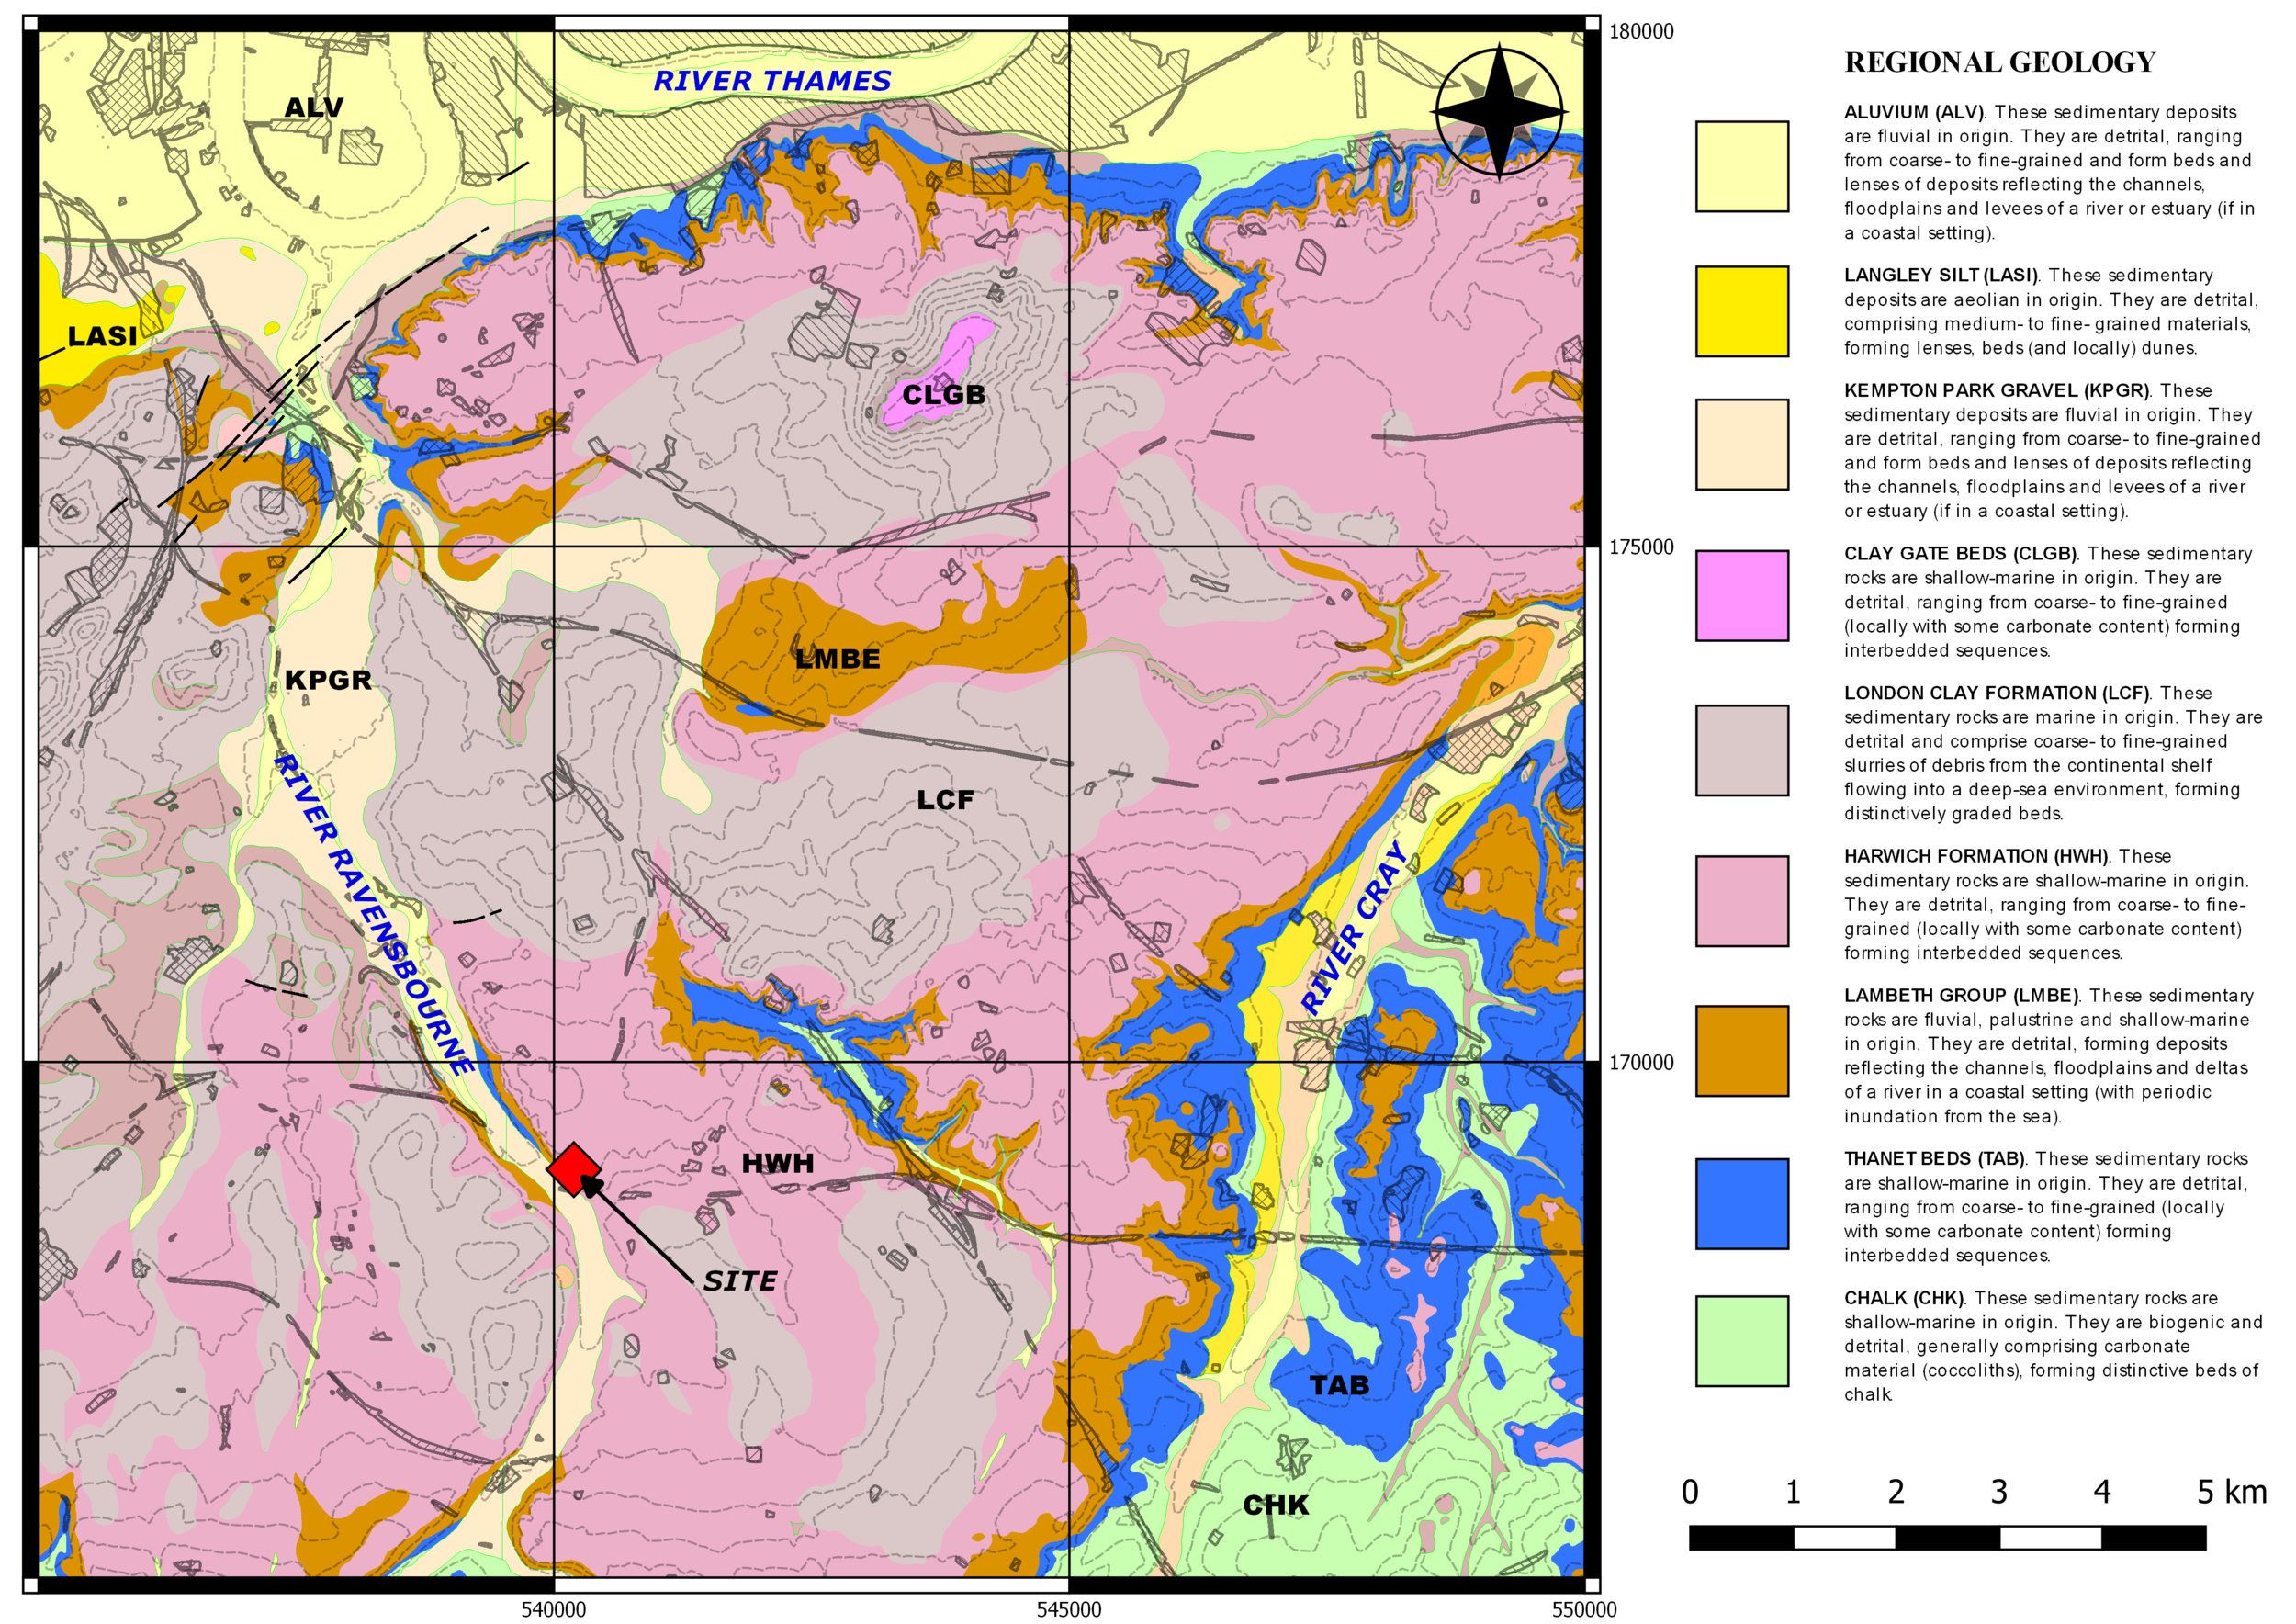 Geological mapping